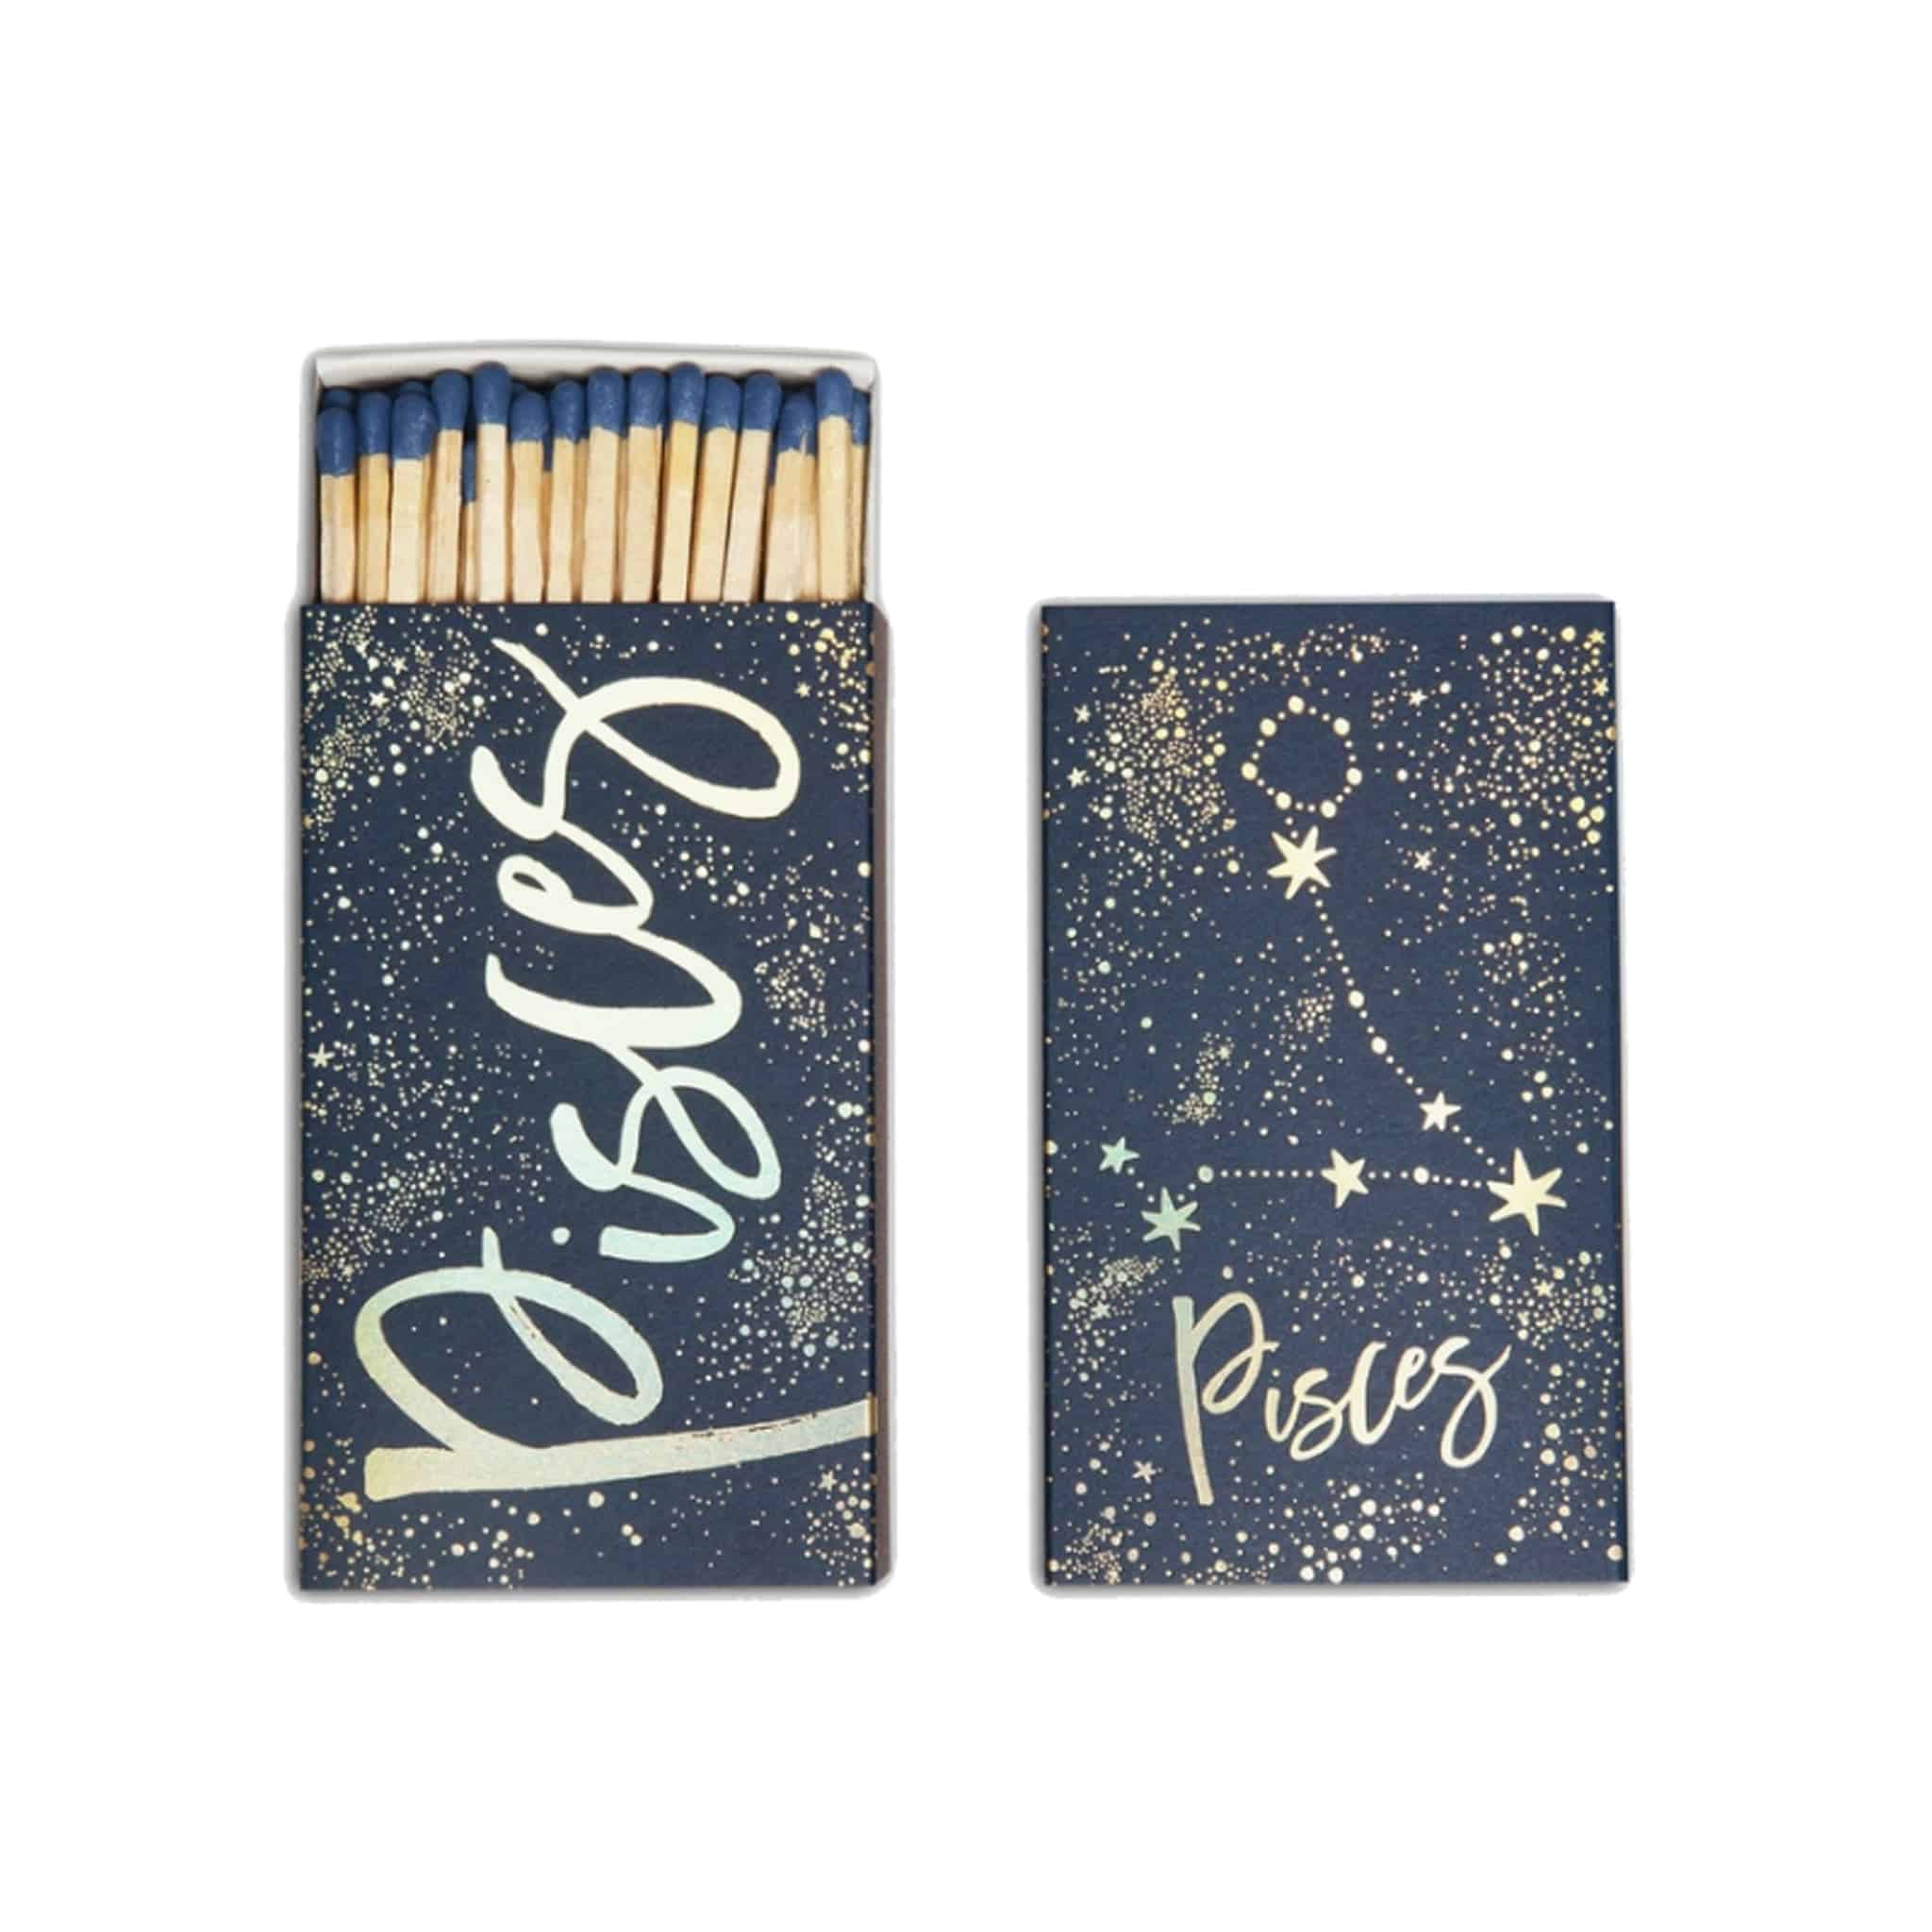 Pisces Zodiac Matchbook - Extra Large 4.5" Cigar Matches - The Gilded Witch